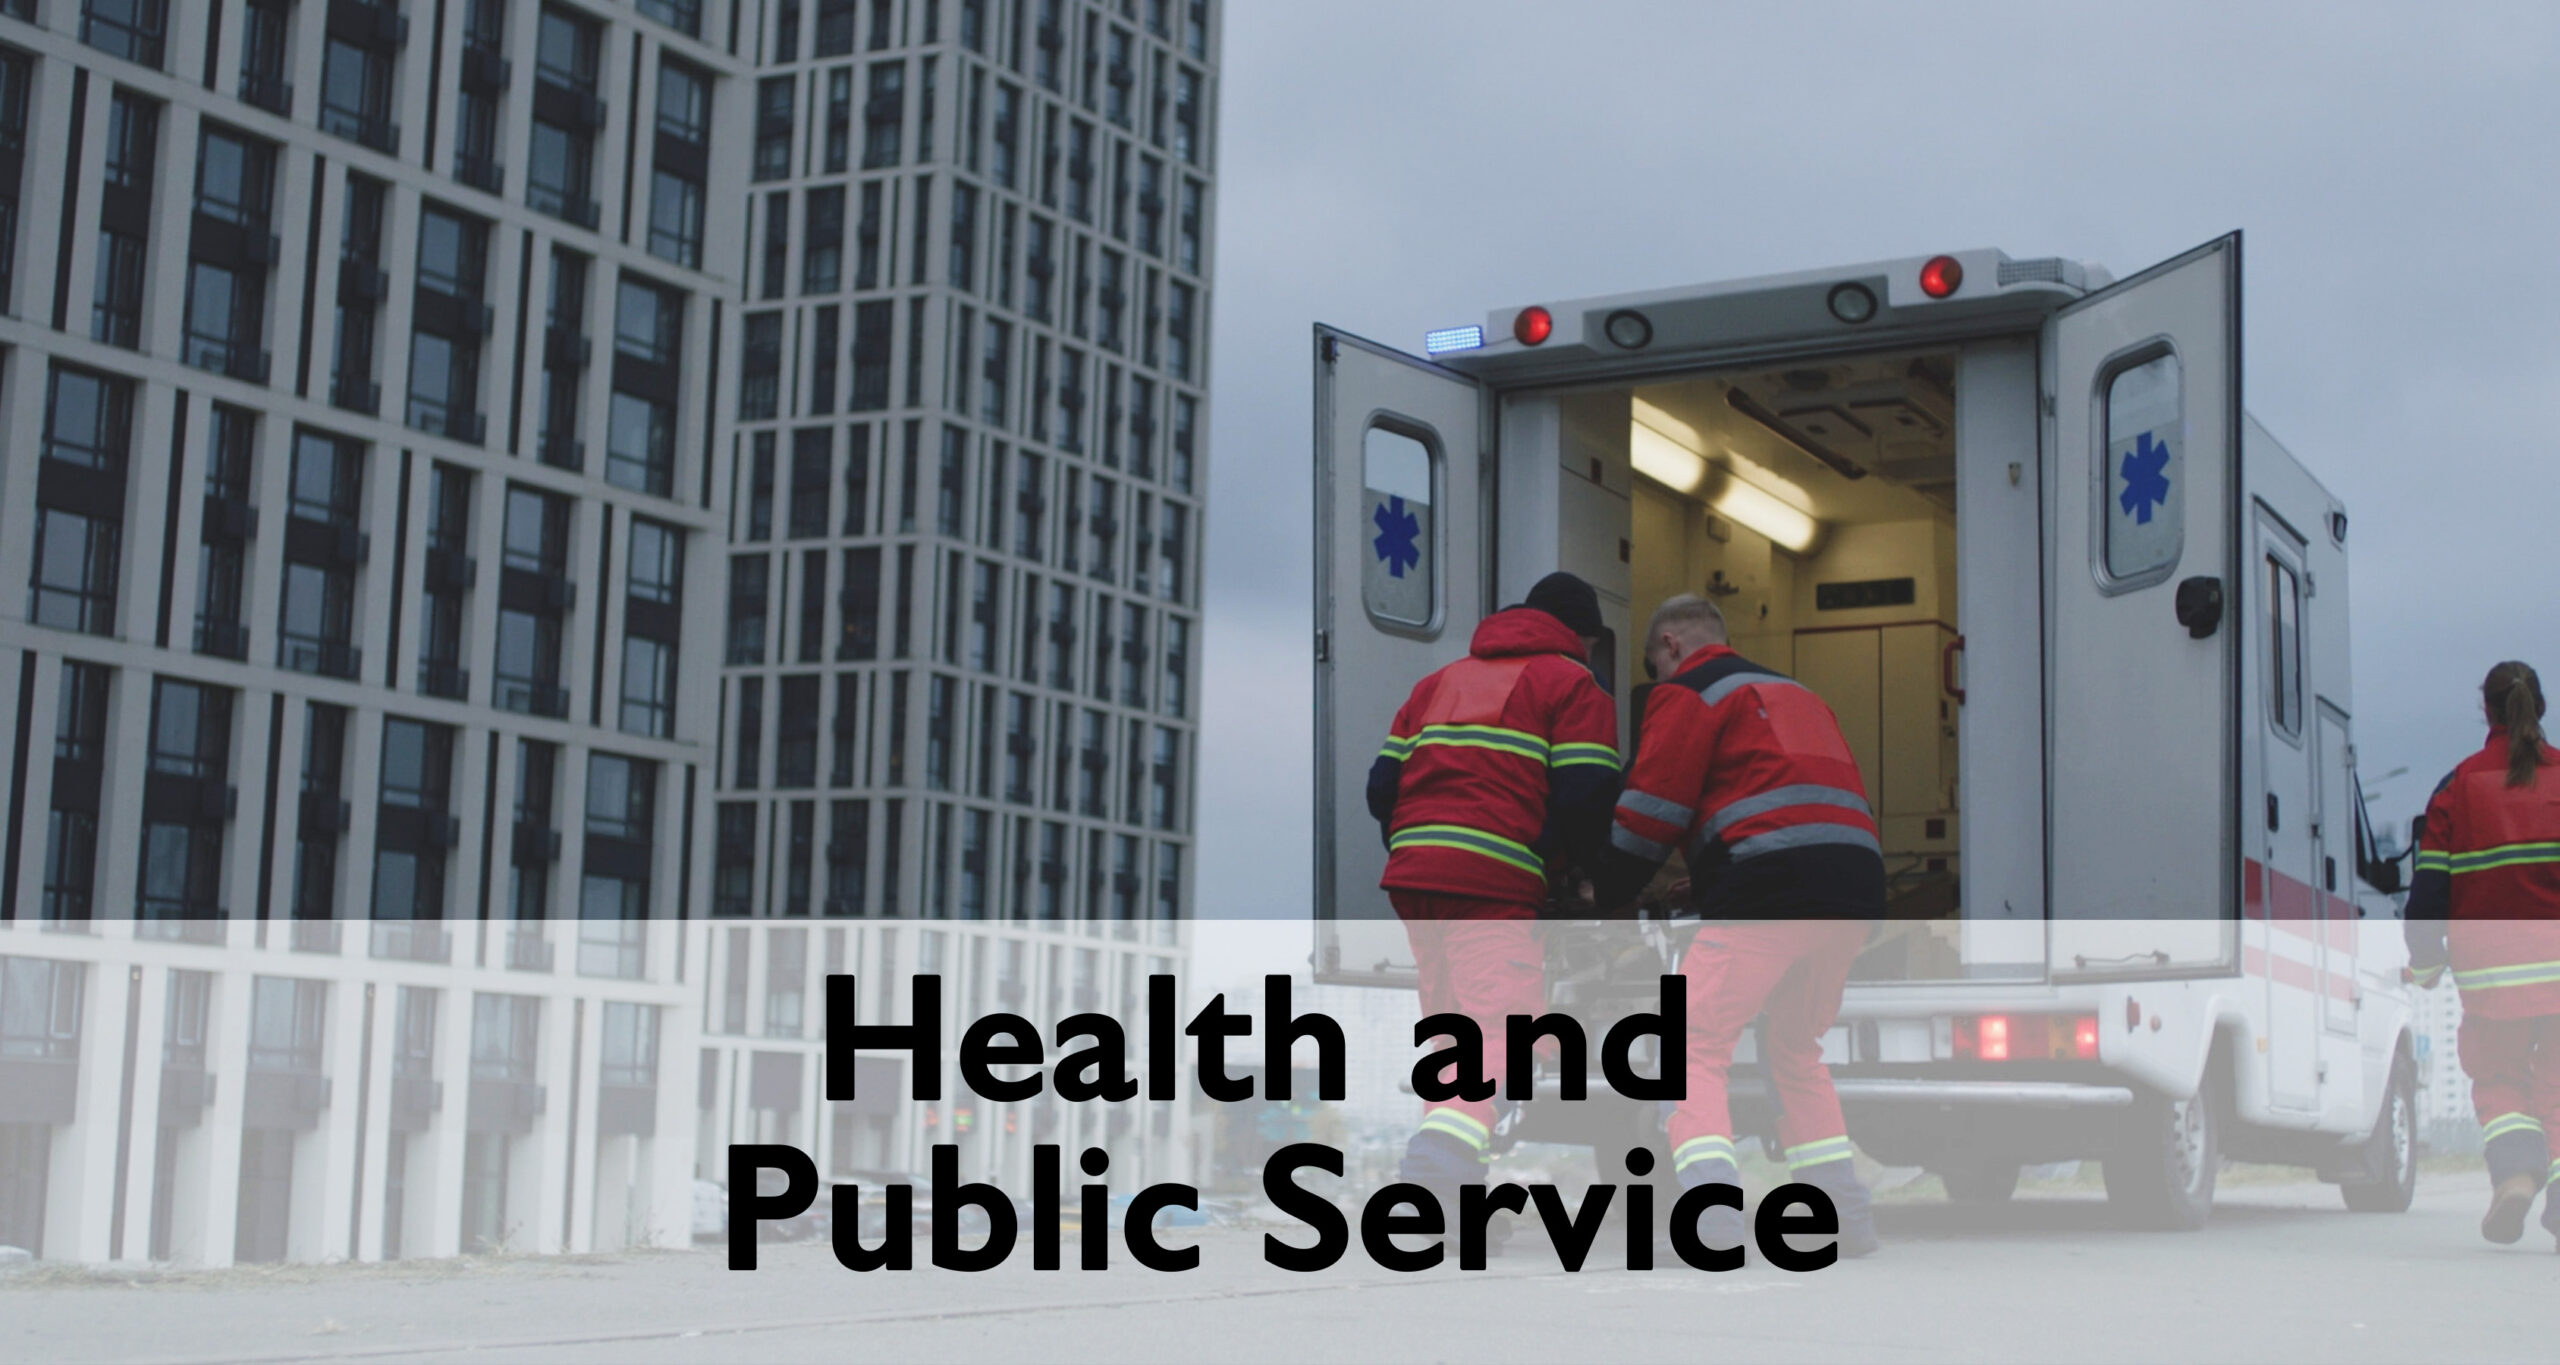 Click image to get to the Health and Public Services pathway web page.